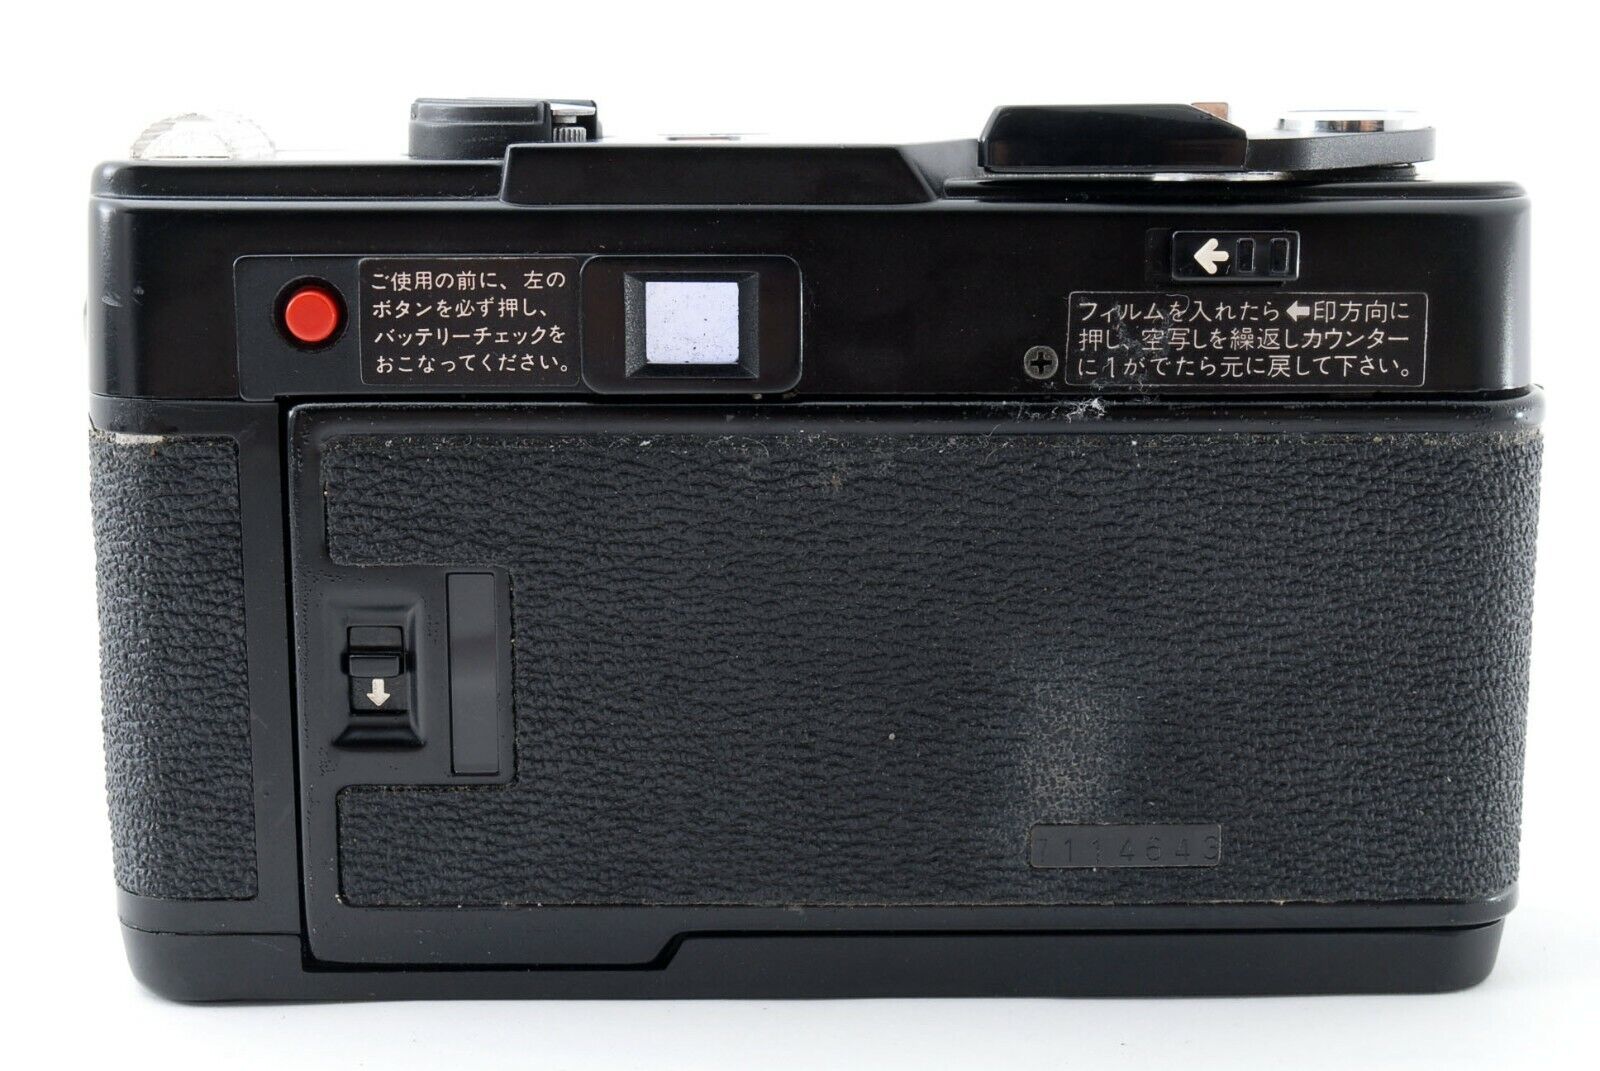 Fujifilm FLASH FUJICA DATE with filter From Japan [For Parts] | eBay